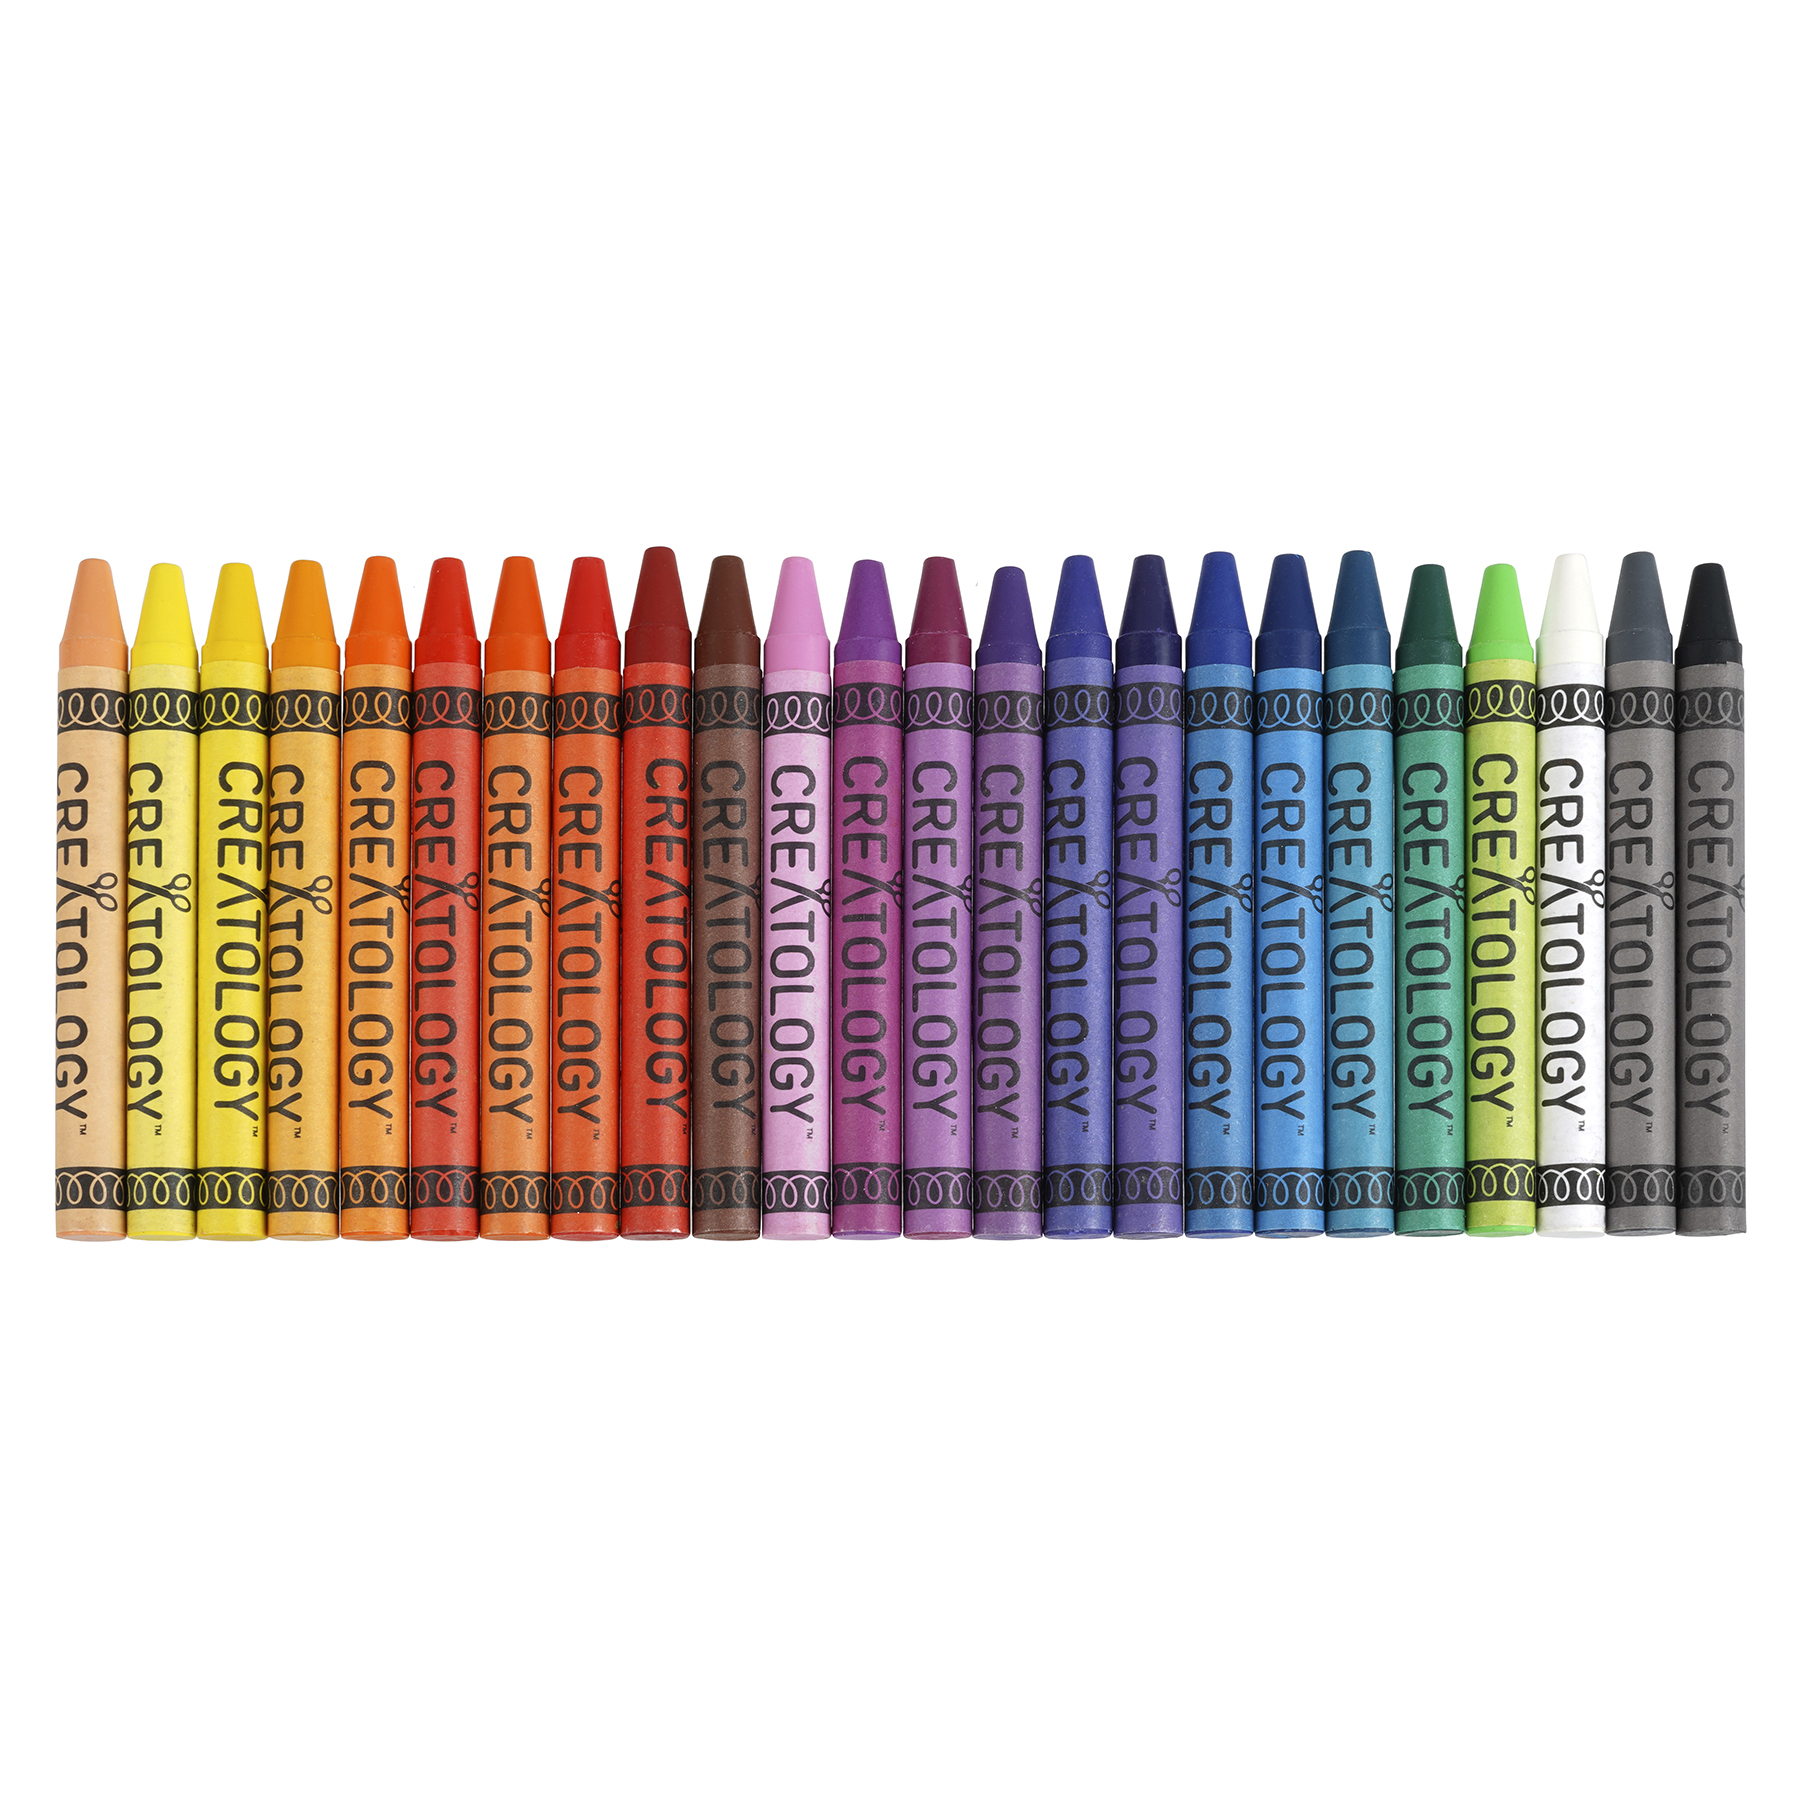 24 Packs: 24 ct. (576 total) Crayons by Creatology™